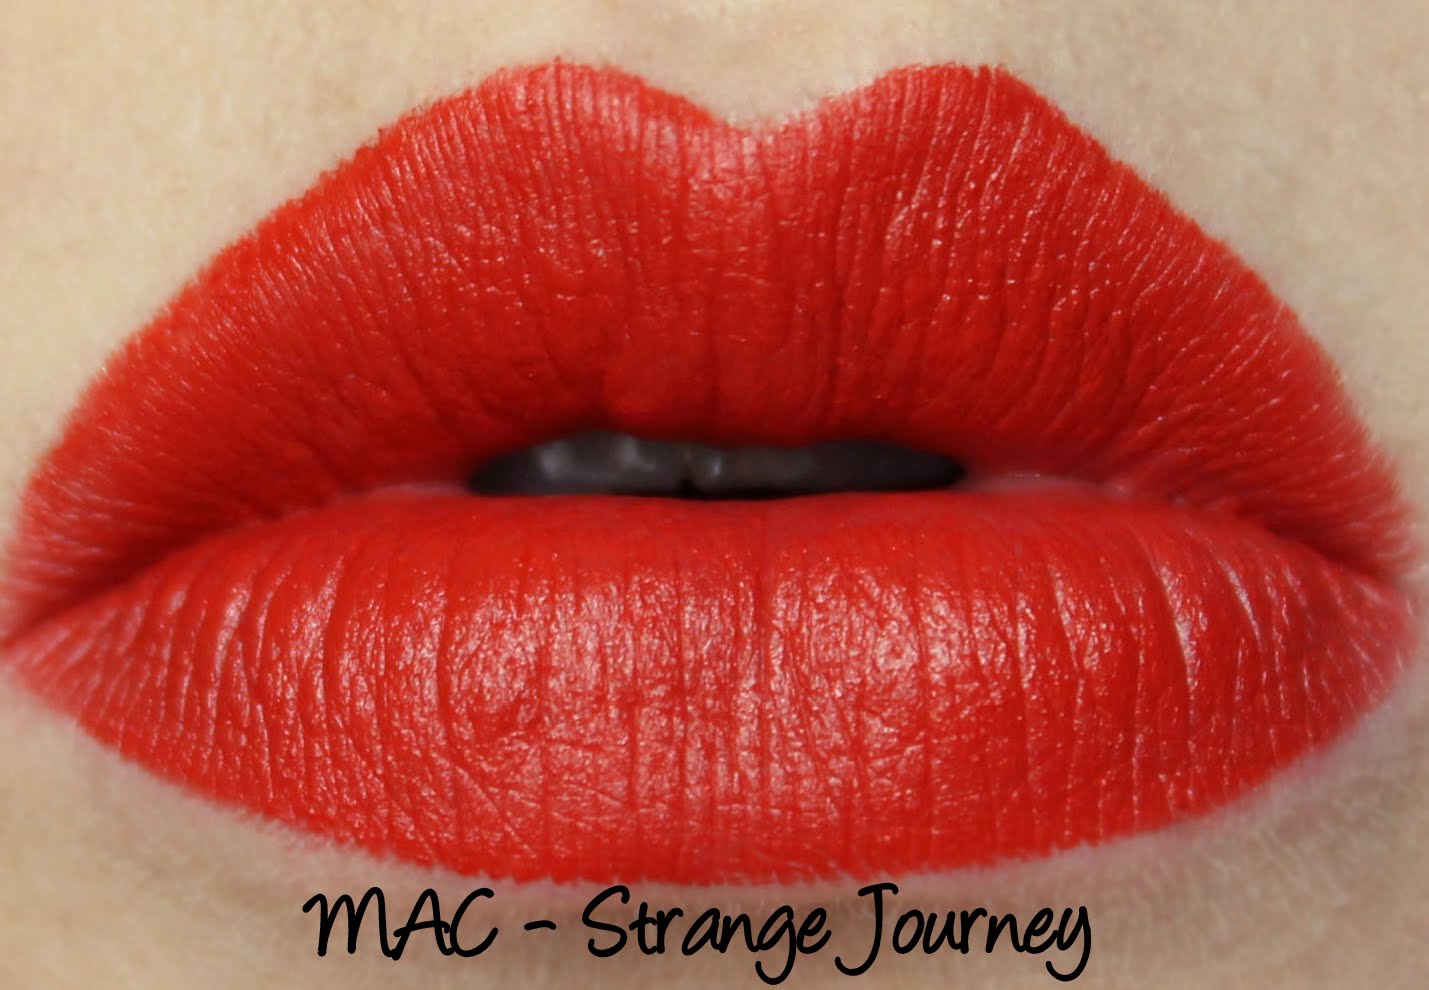 MAC X Rocky Horror Picture Show Lipsticks: Strange Journey Swatches & Review